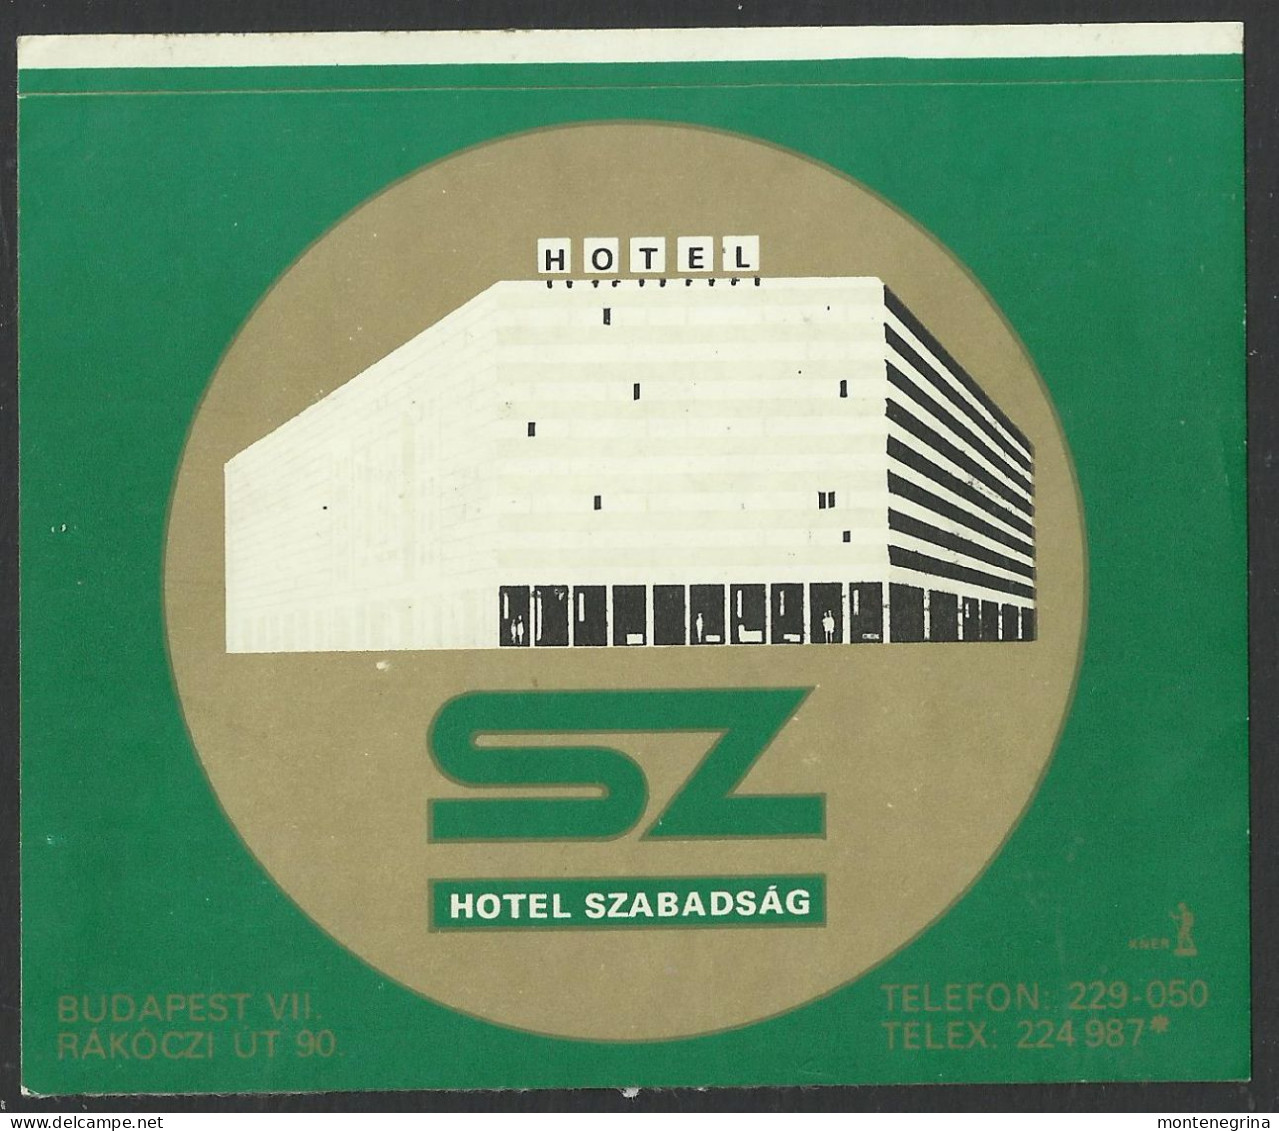 HUNGARY - BUDAMPEST - Hotel, SZABADSAG Luggage Label - 10 X 9 Cm (see Sales Conditions) - Hotelaufkleber